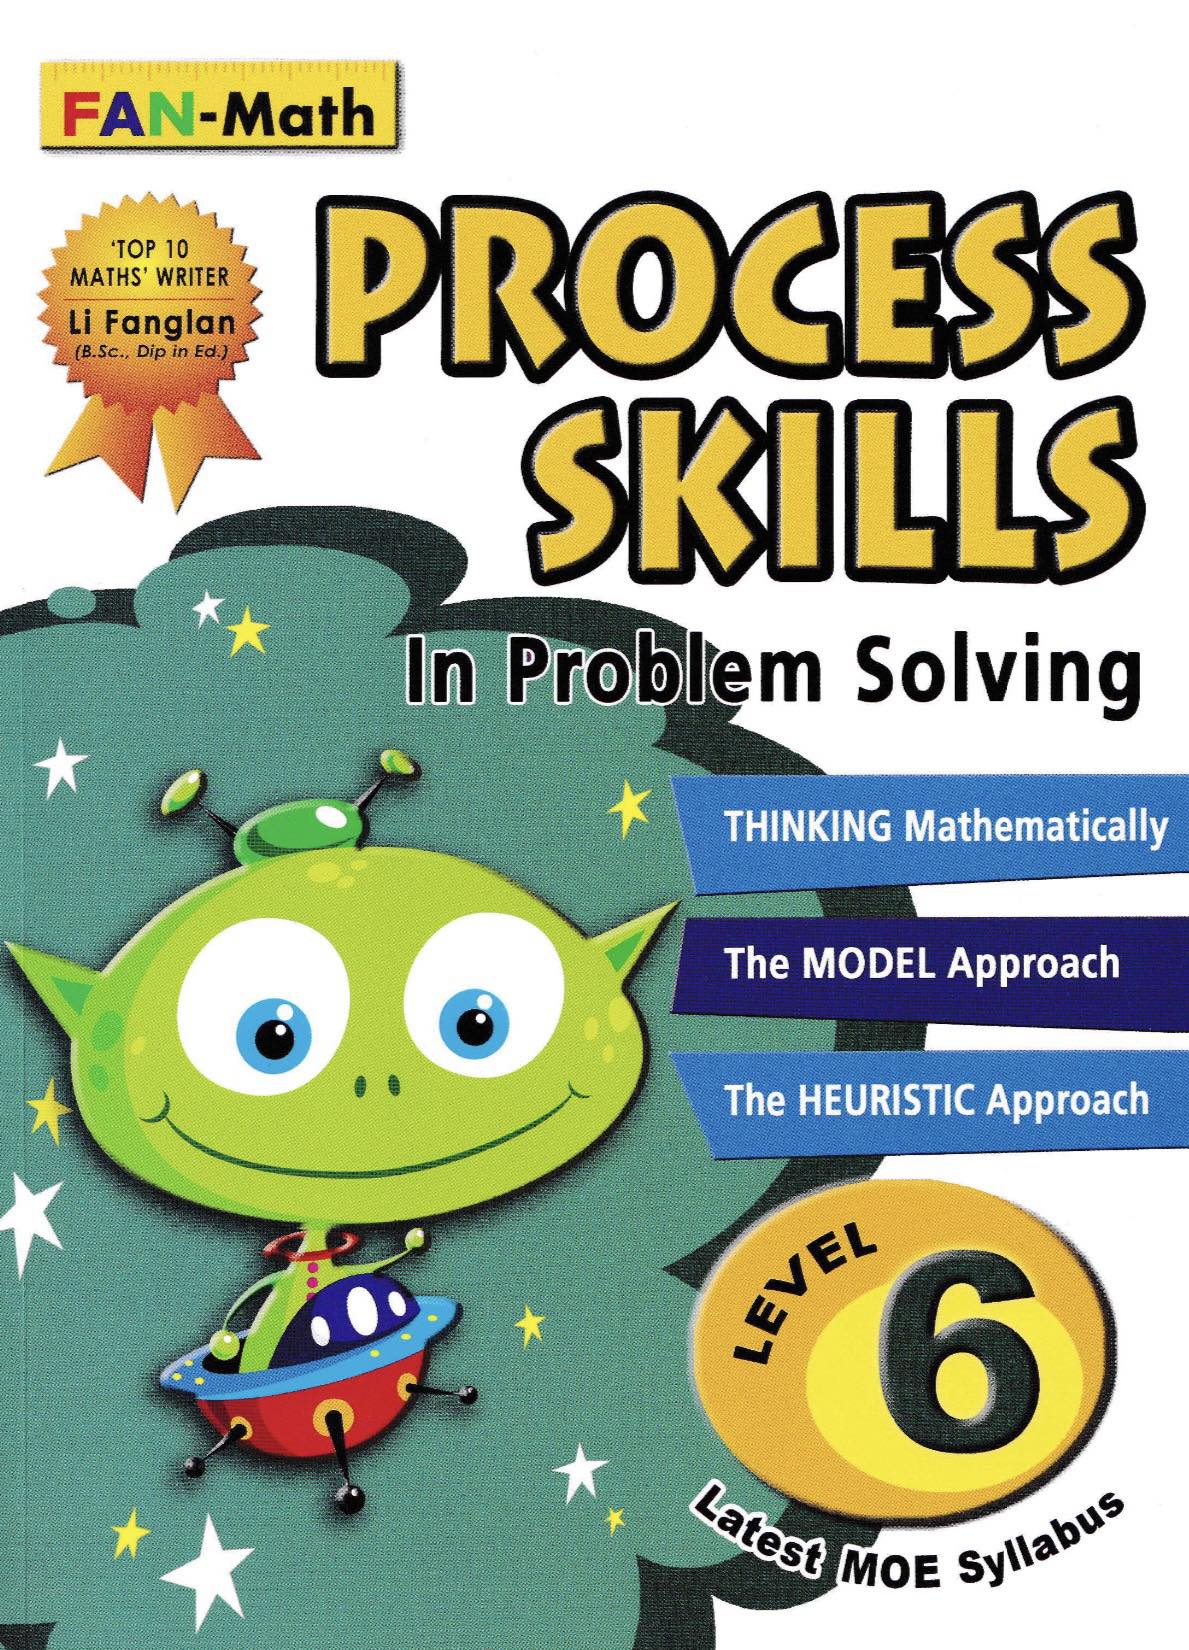 Process Skills In Problem Solving for Primary Levels